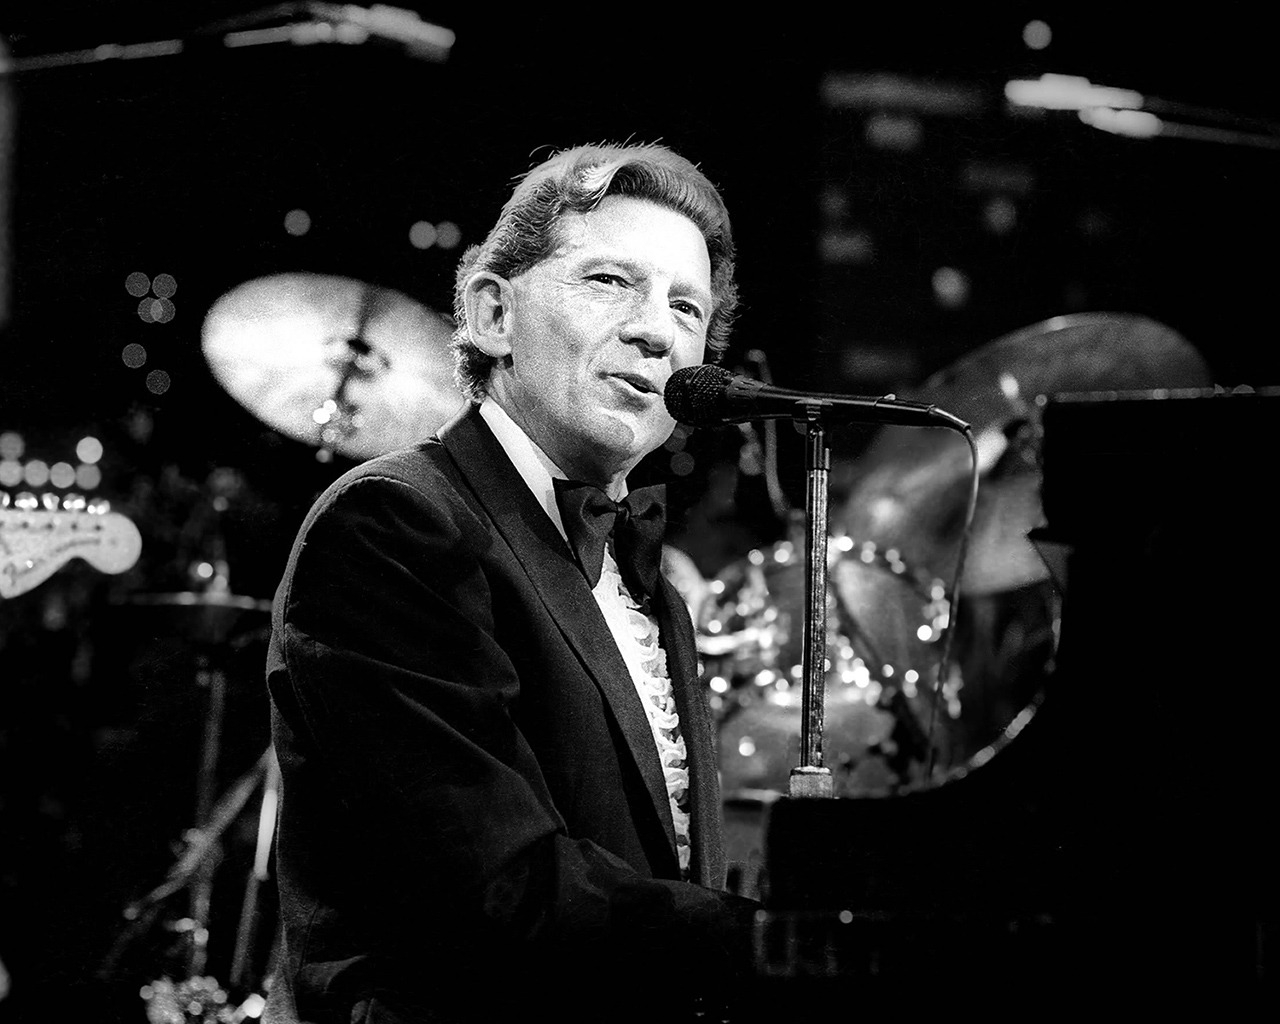 Jerry Lee Lewis for 1280 x 1024 resolution